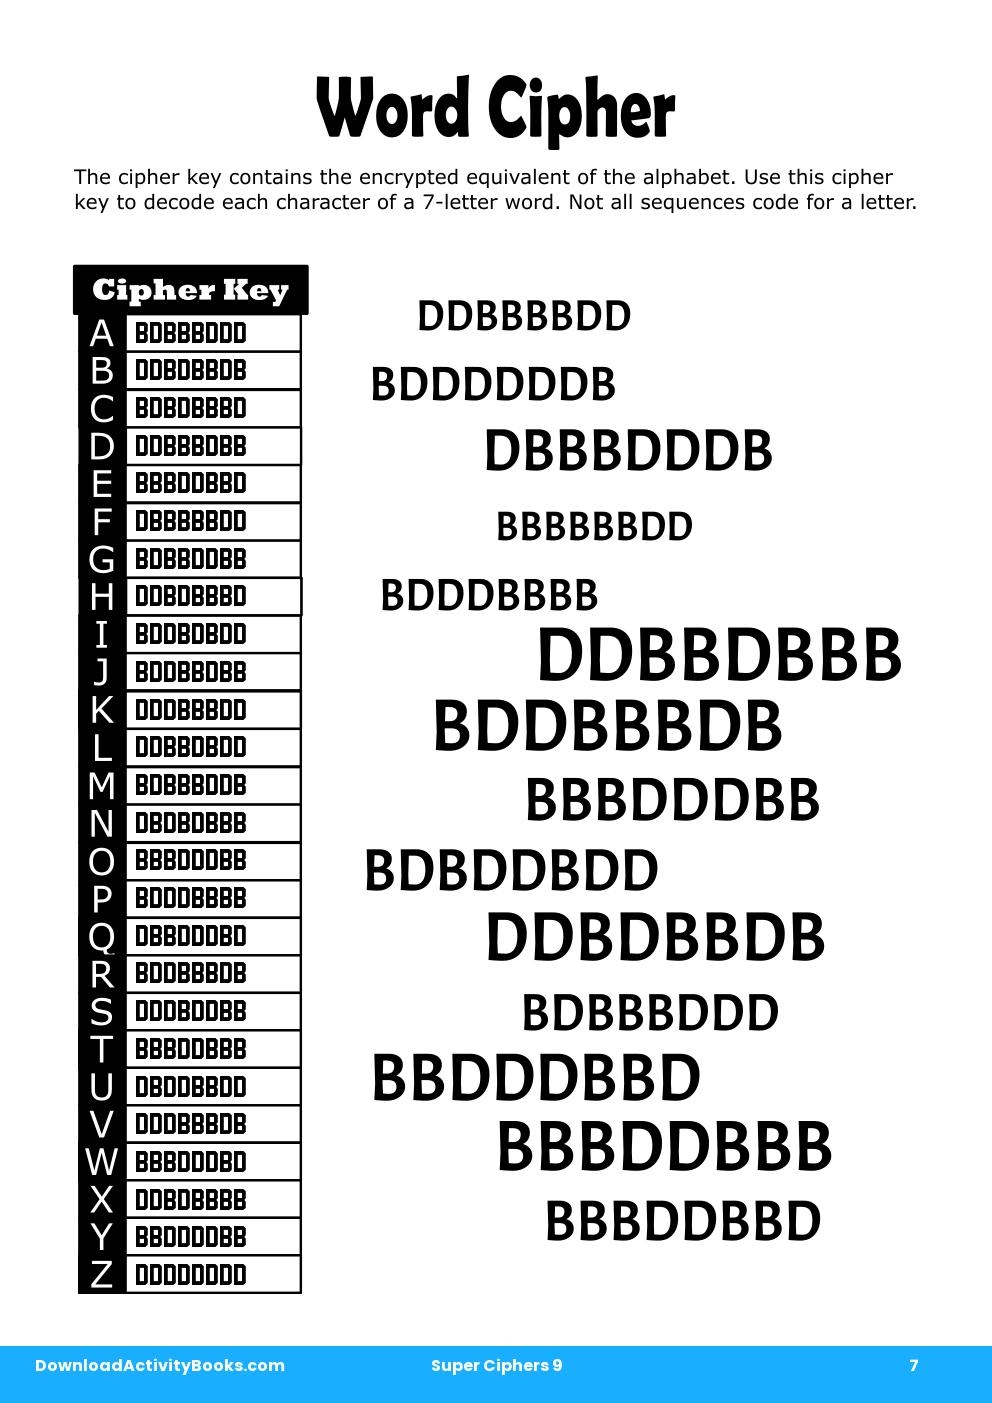 Word Cipher in Super Ciphers 9